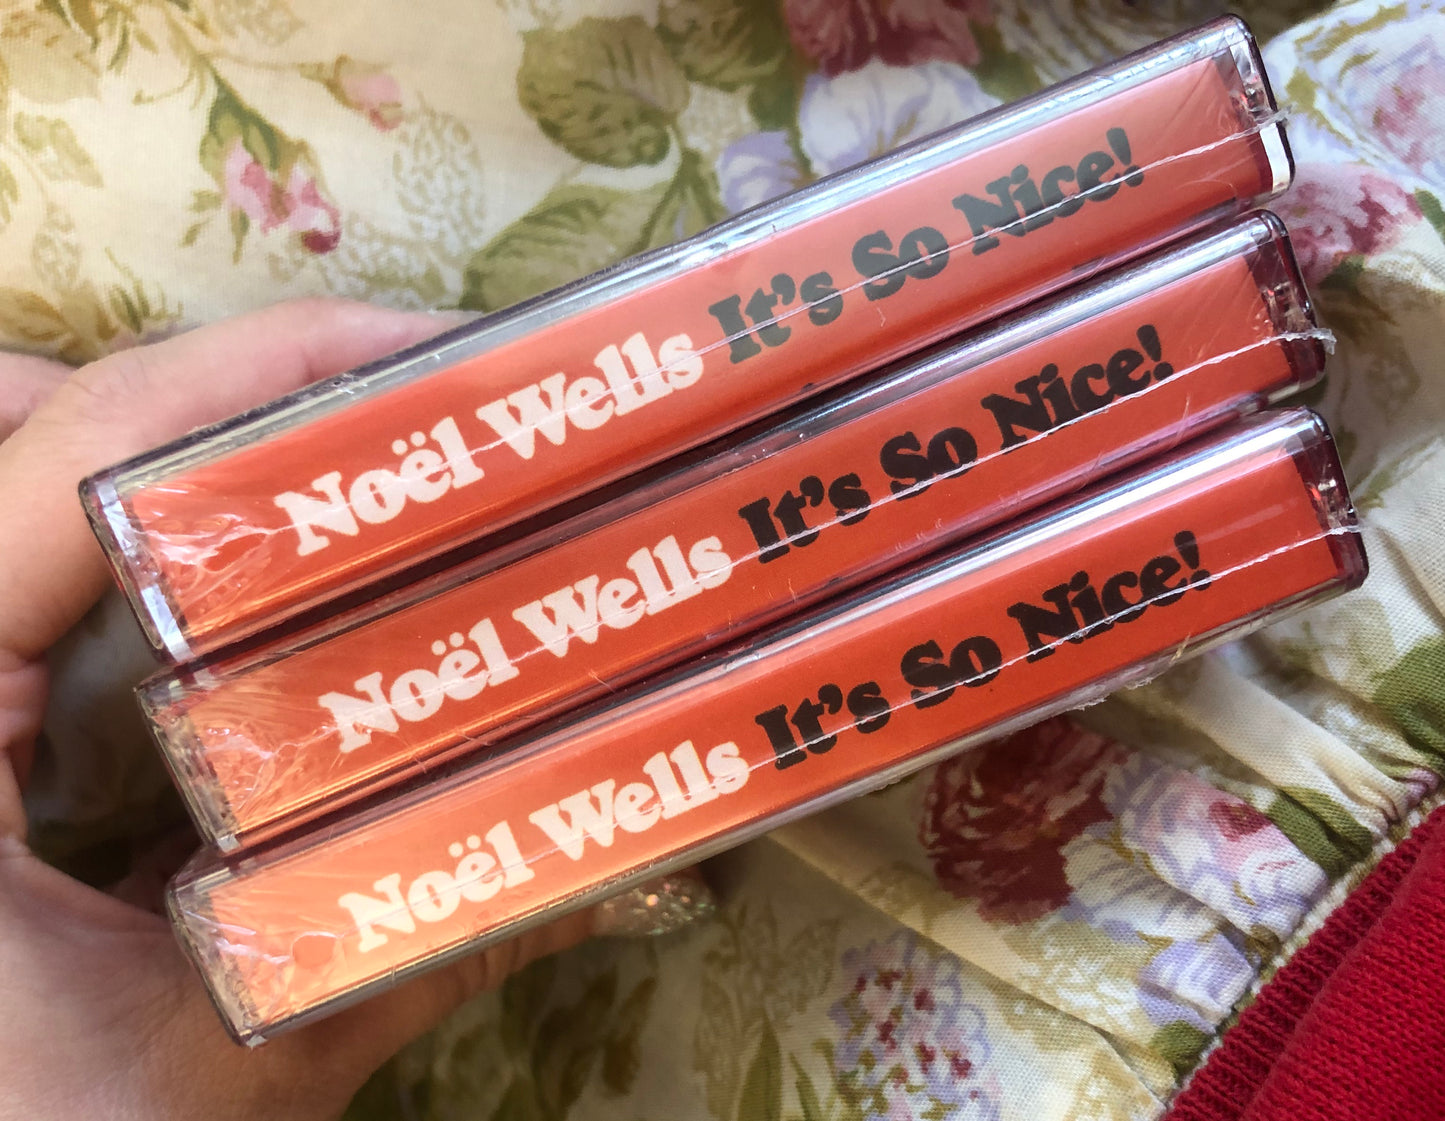 Limited Edition "It's So Nice!" Cassette Tape